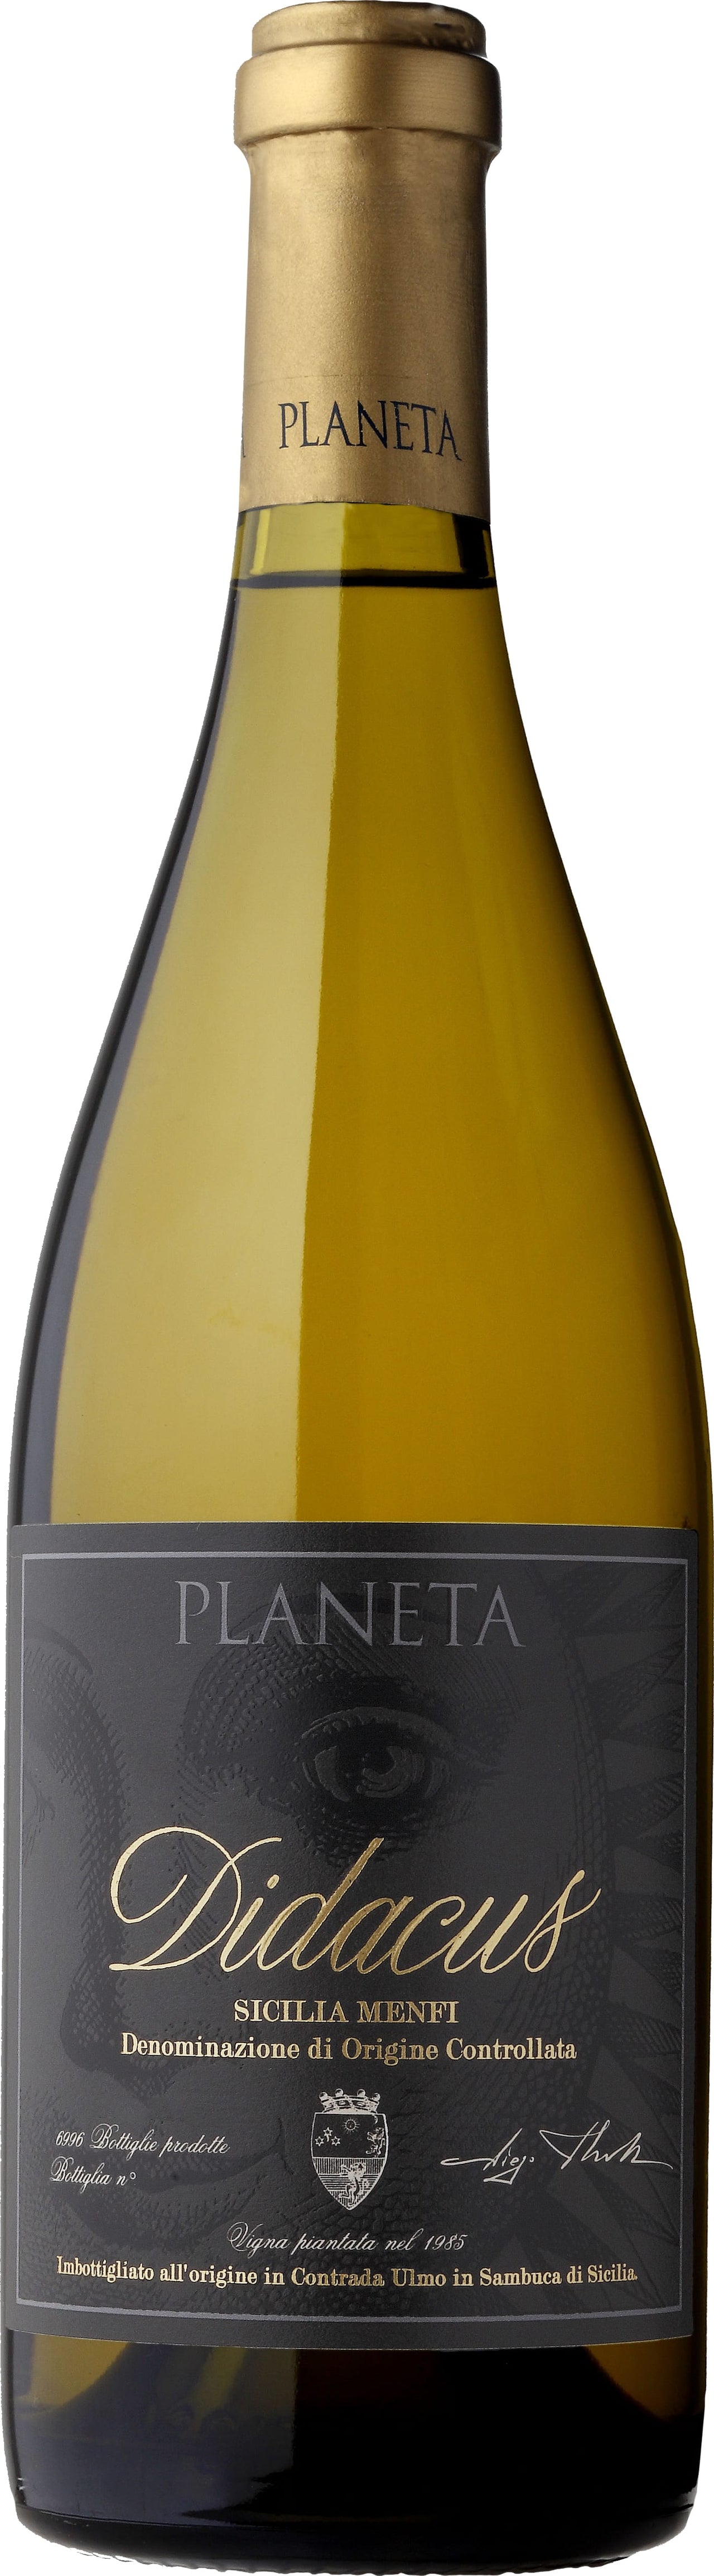 Planeta Didacus Chardonnay 2020 75cl - Buy Planeta Wines from GREAT WINES DIRECT wine shop